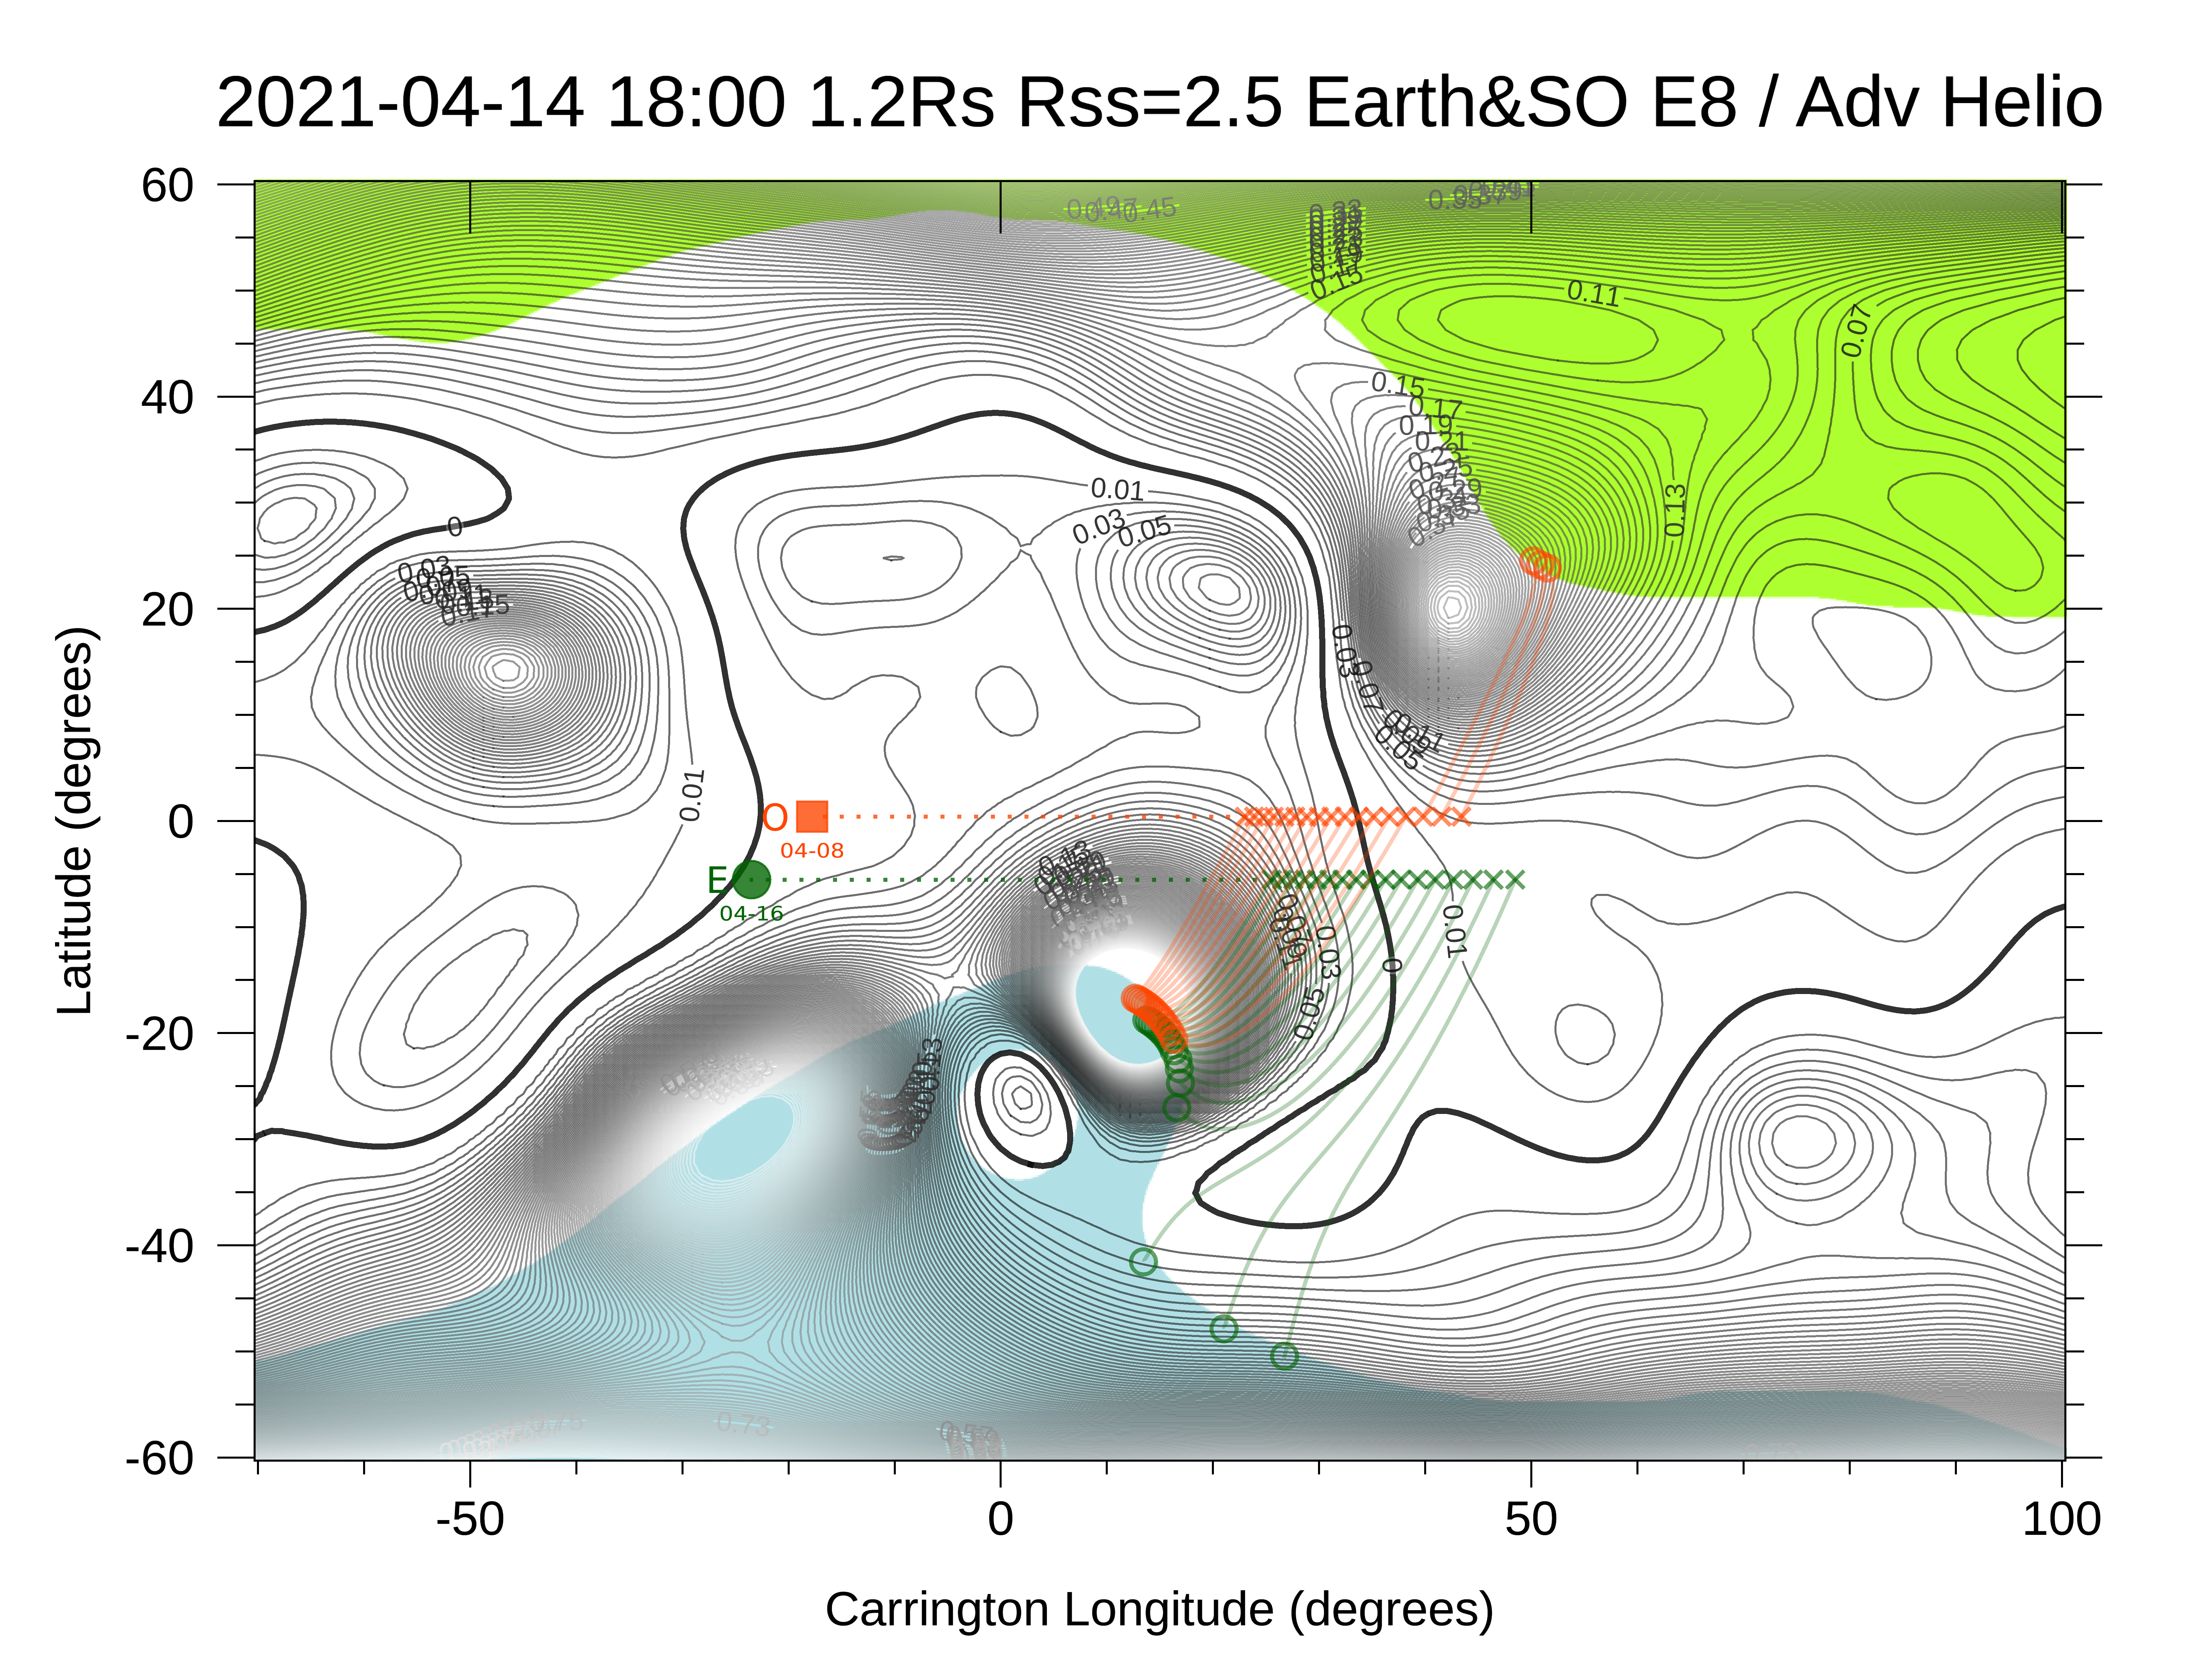 April 14, 2021 magnetic map and connectivity prediction for E8. This gives the possibility to study evolution of the solar wind properties from the same solar sources as PSP will observe a few weeks later.